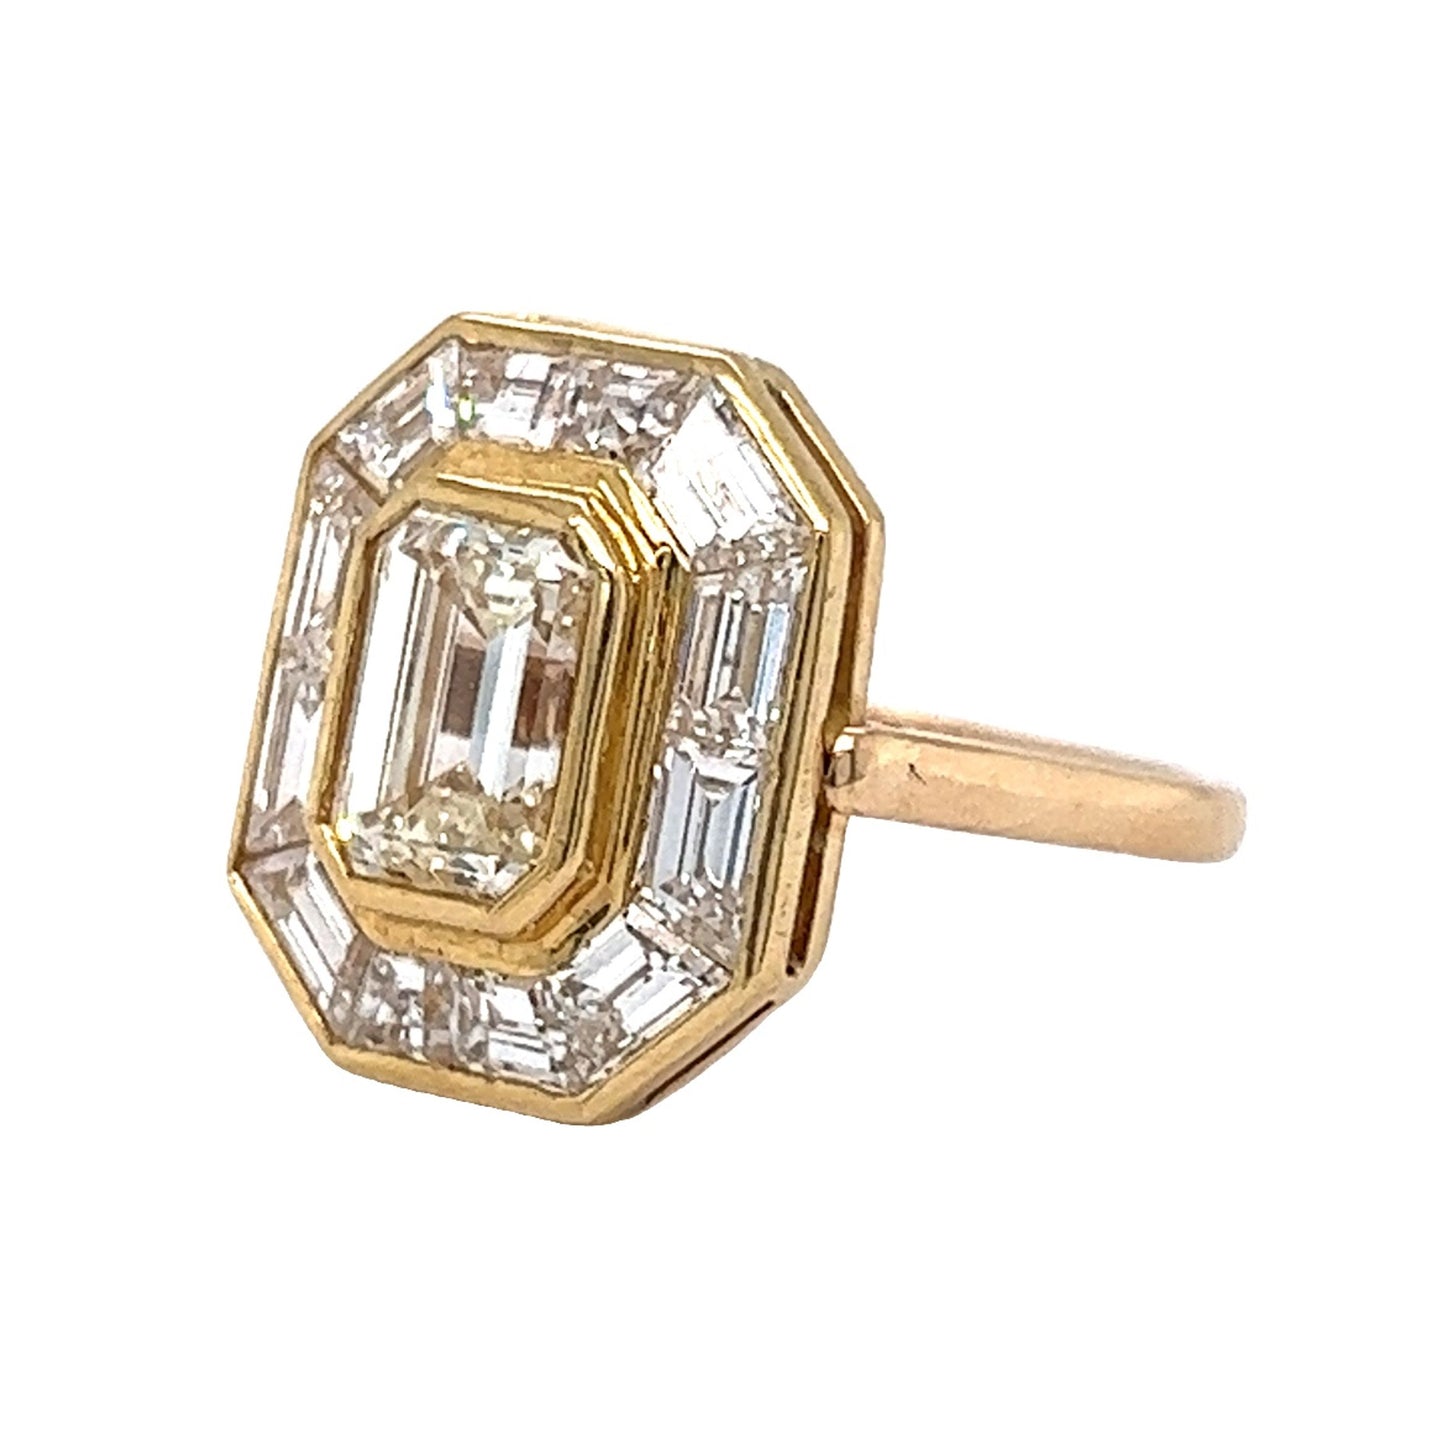 1.69 Emerald Cut Diamond Engagement Ring in Yellow Gold